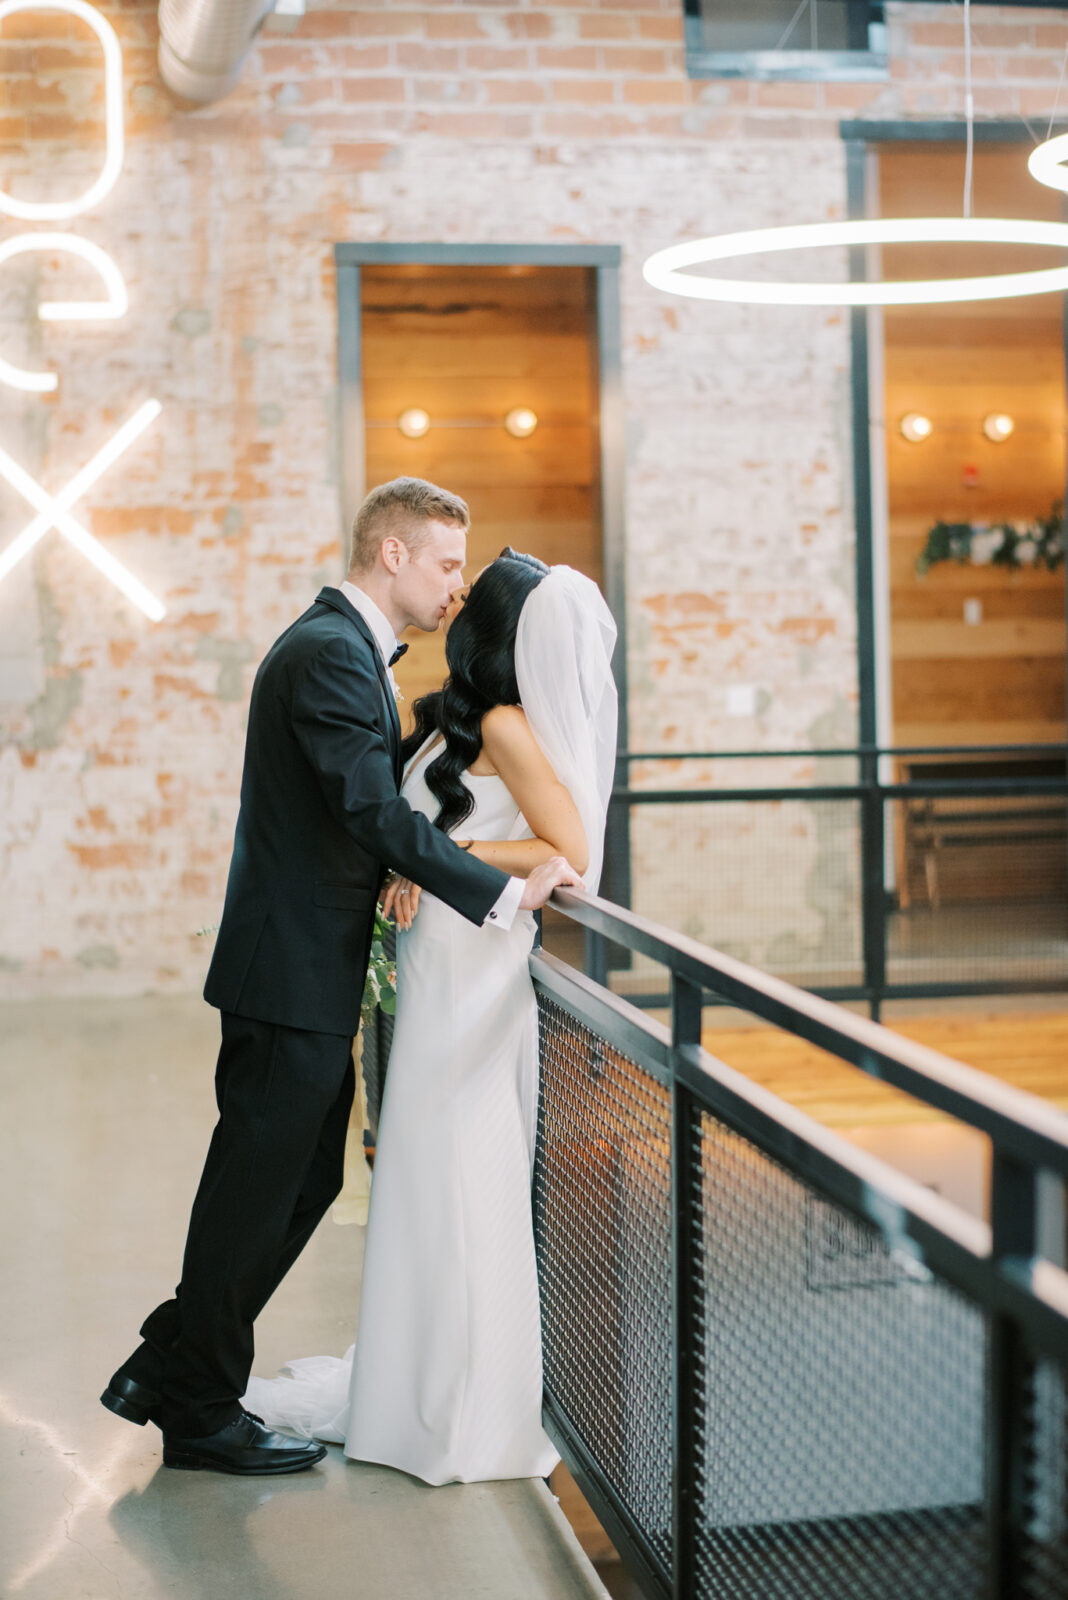 romantic bride and groom portraits on balcony with black industrial elements, wedding venue featuring trendy neon signs mounted on a brick wall